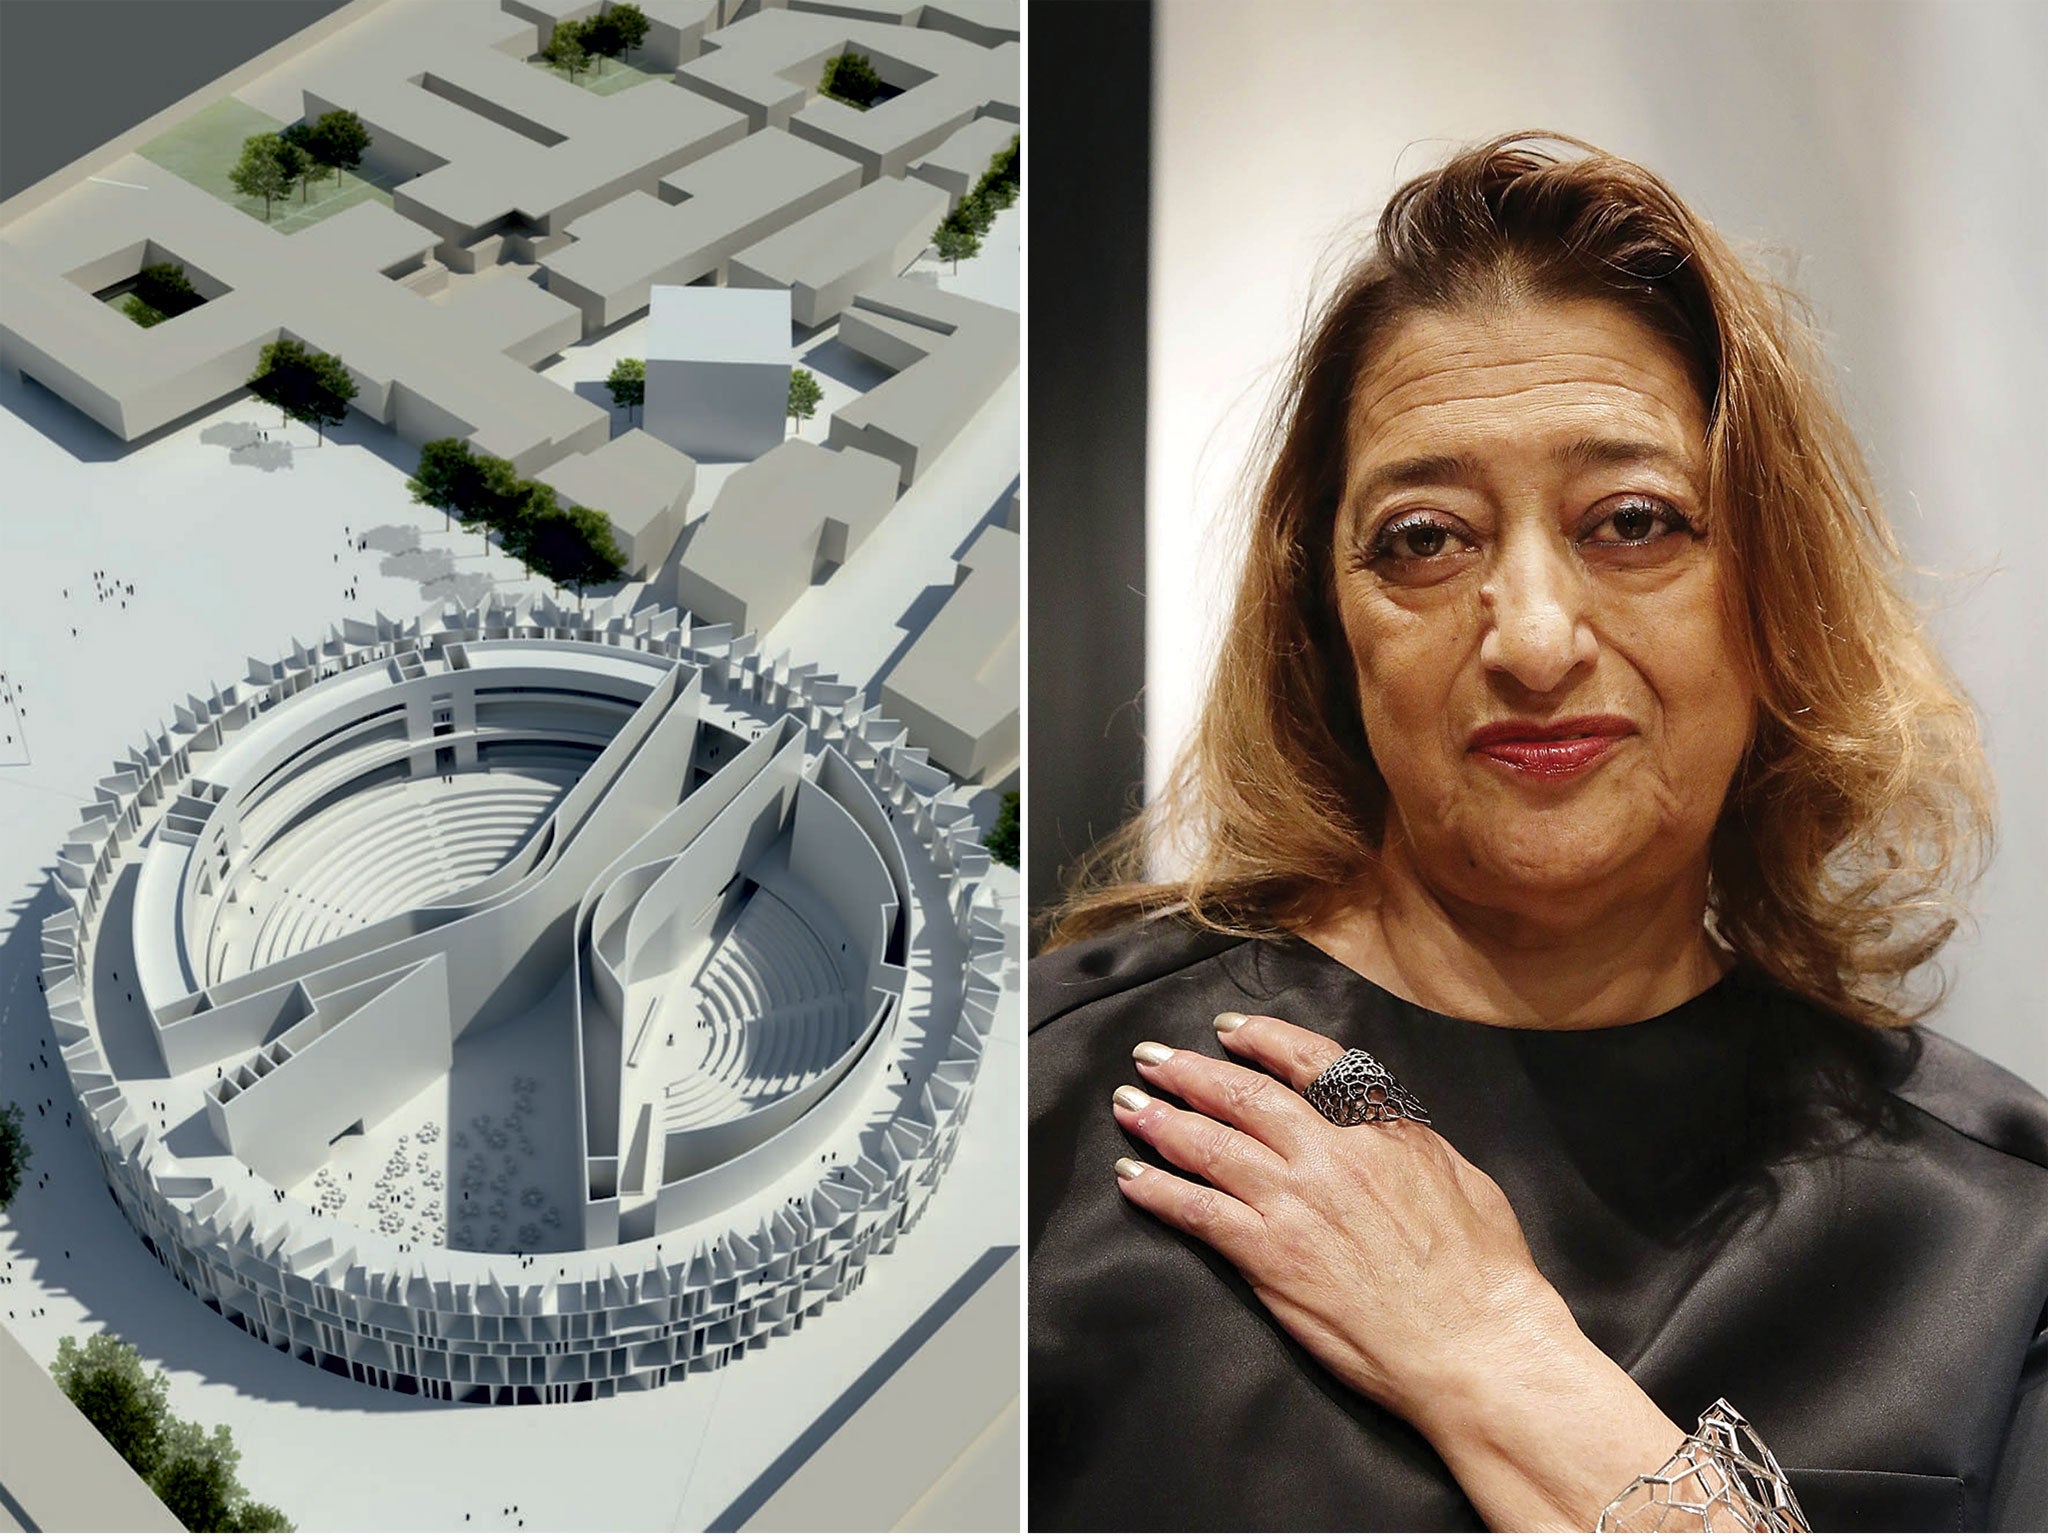 The design by British studio Assemblage, left, won the open competition, with Zaha Hadid’s entry coming third